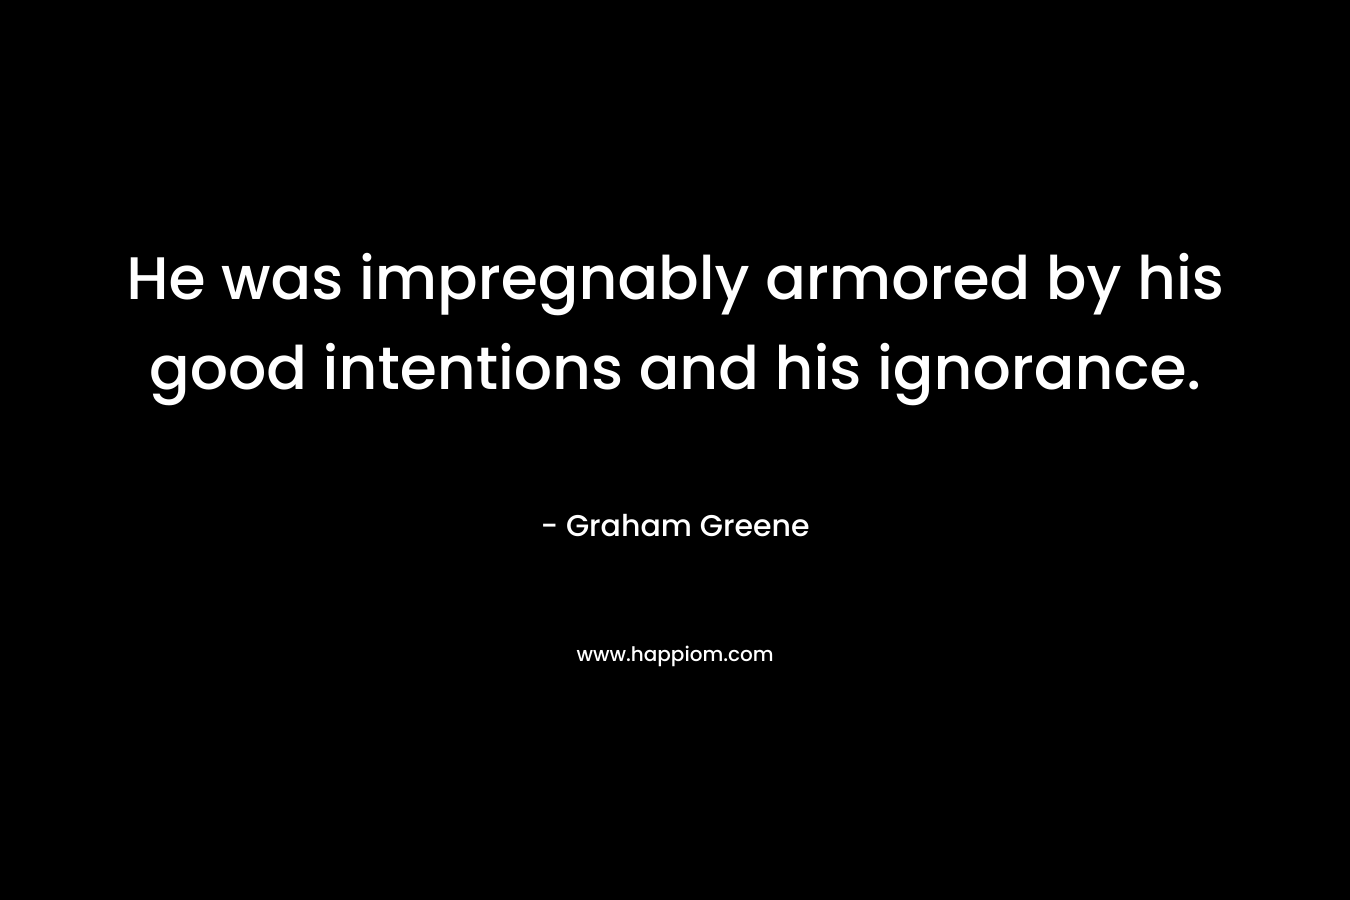 He was impregnably armored by his good intentions and his ignorance. – Graham Greene